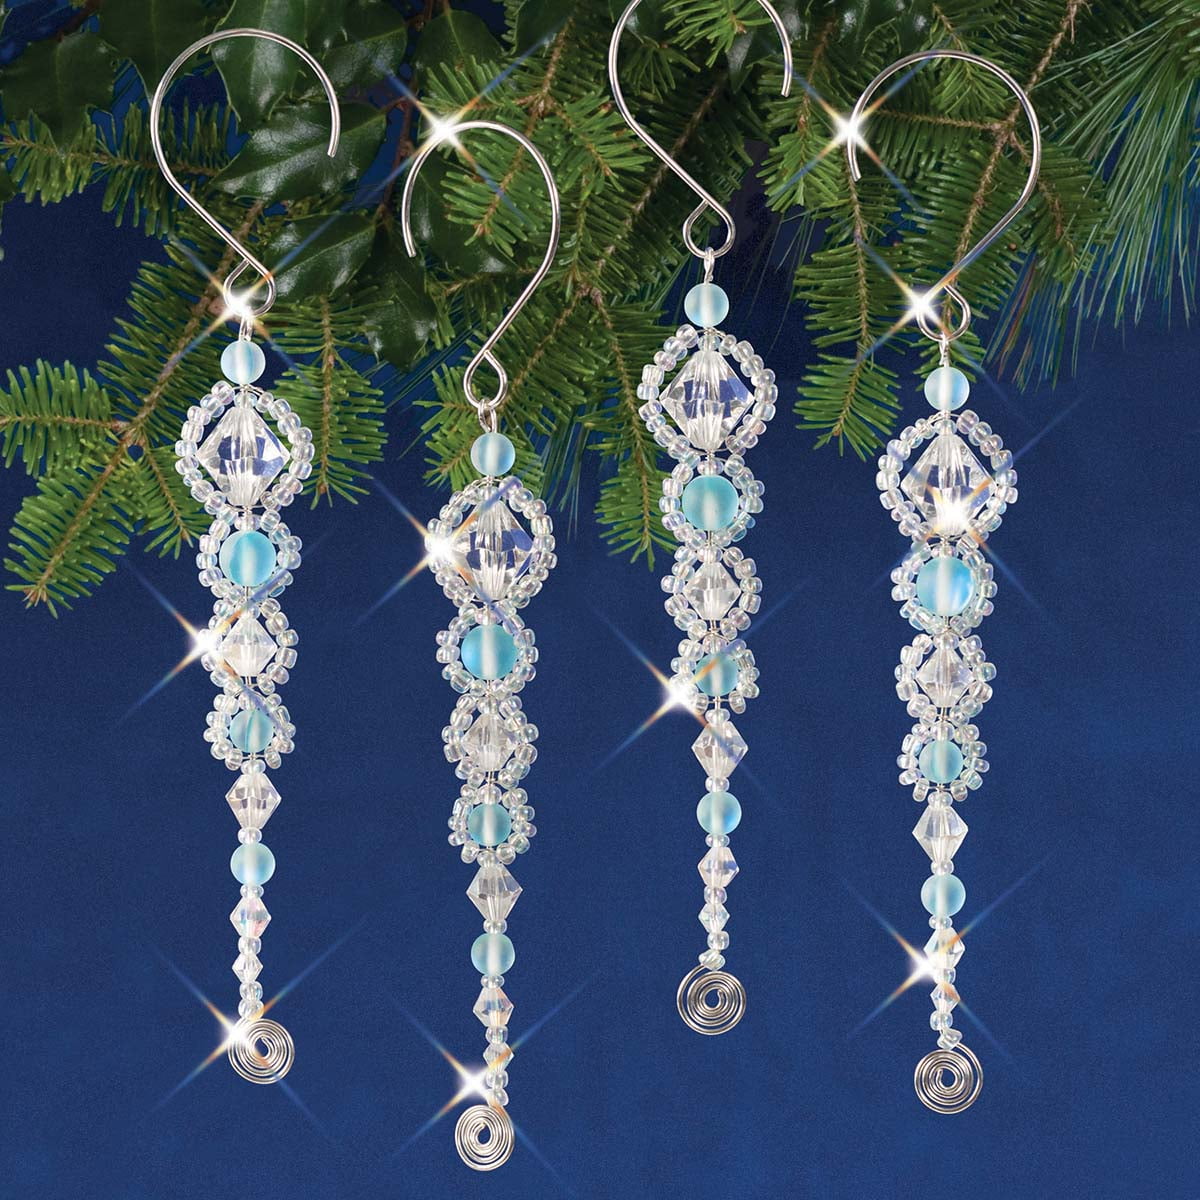 6 REAL CRYSTALS Magnetic Multi-faceted Icicles Charms Light Chandelier Lamp 2B 